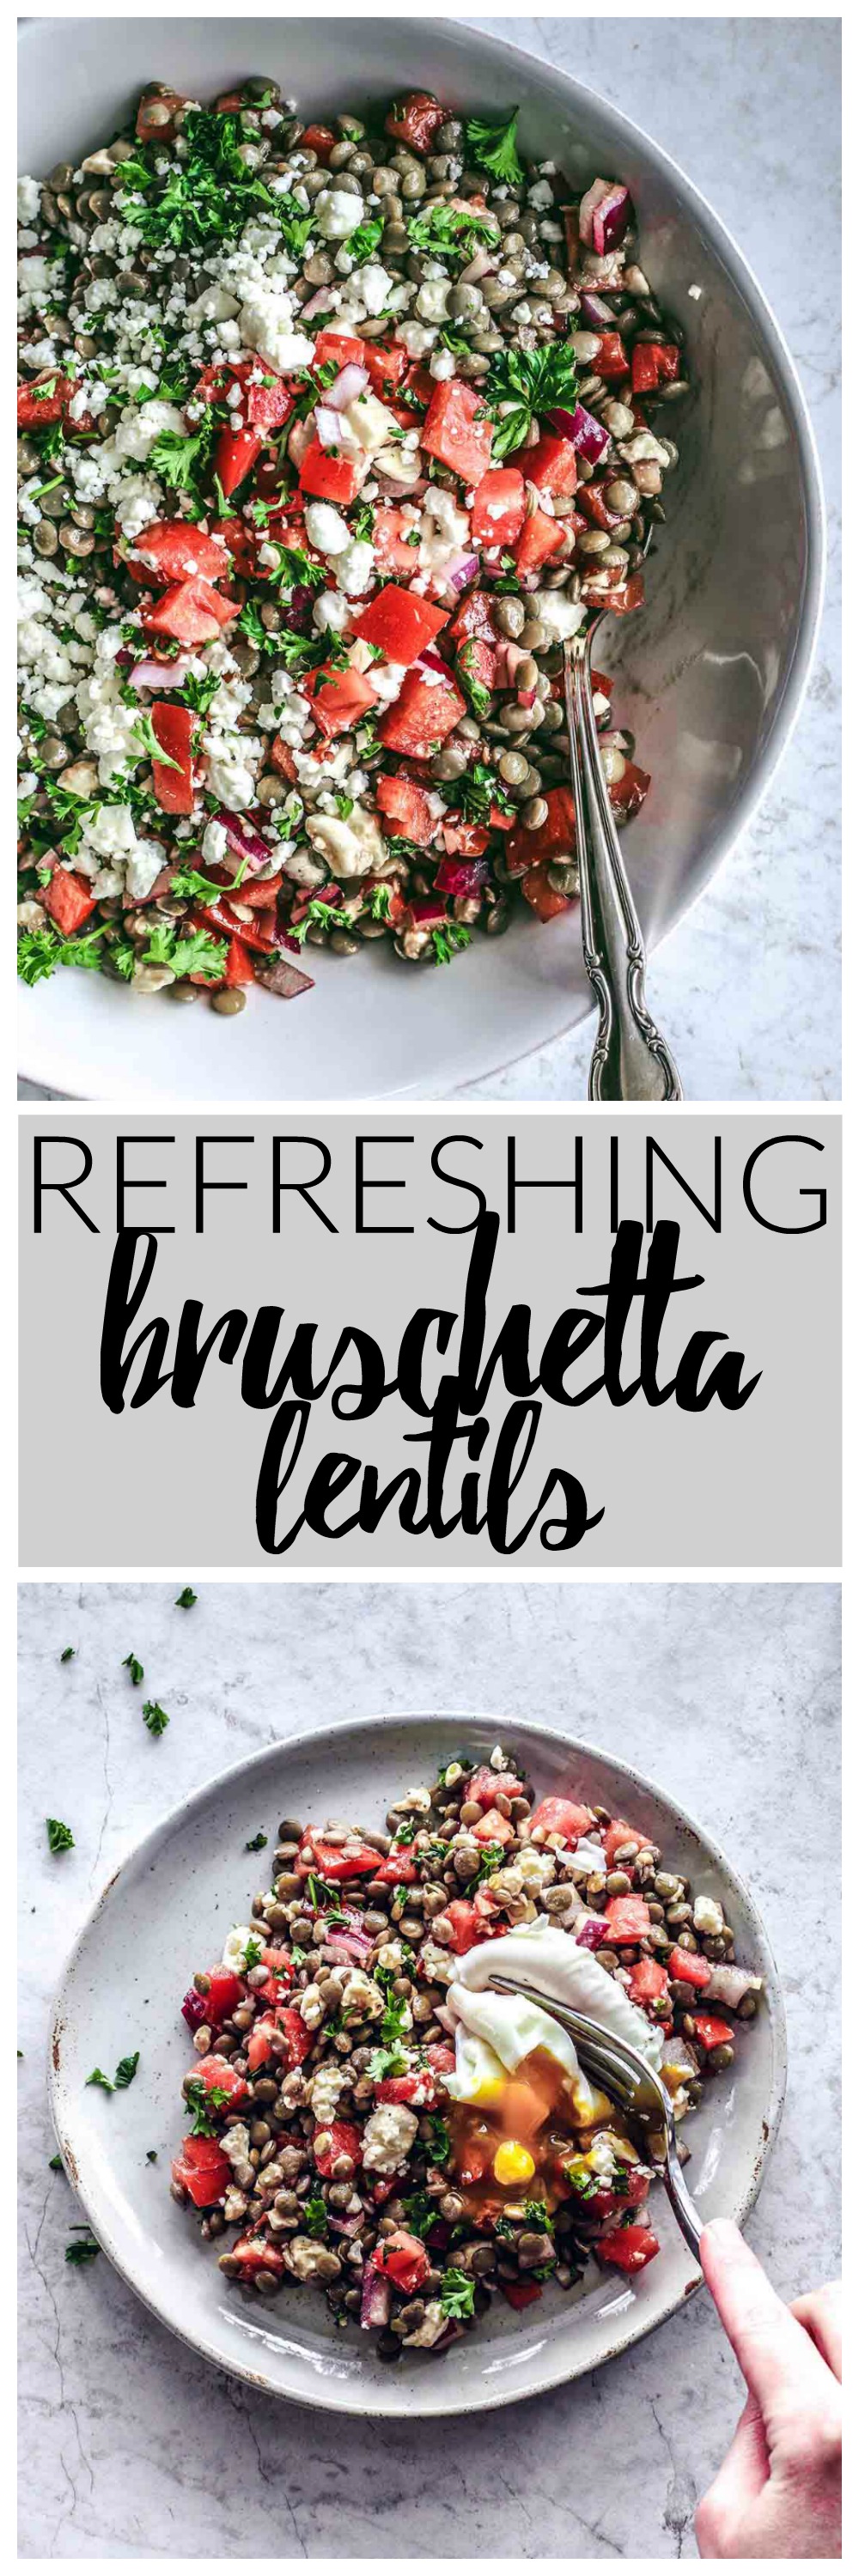 Refreshing Bruschetta Lentils With Feta | Killing Thyme — This beauty makes for a wholesome and light lunch, or a fab side at dinner. Top with a poached egg for the most ultimate of noms.